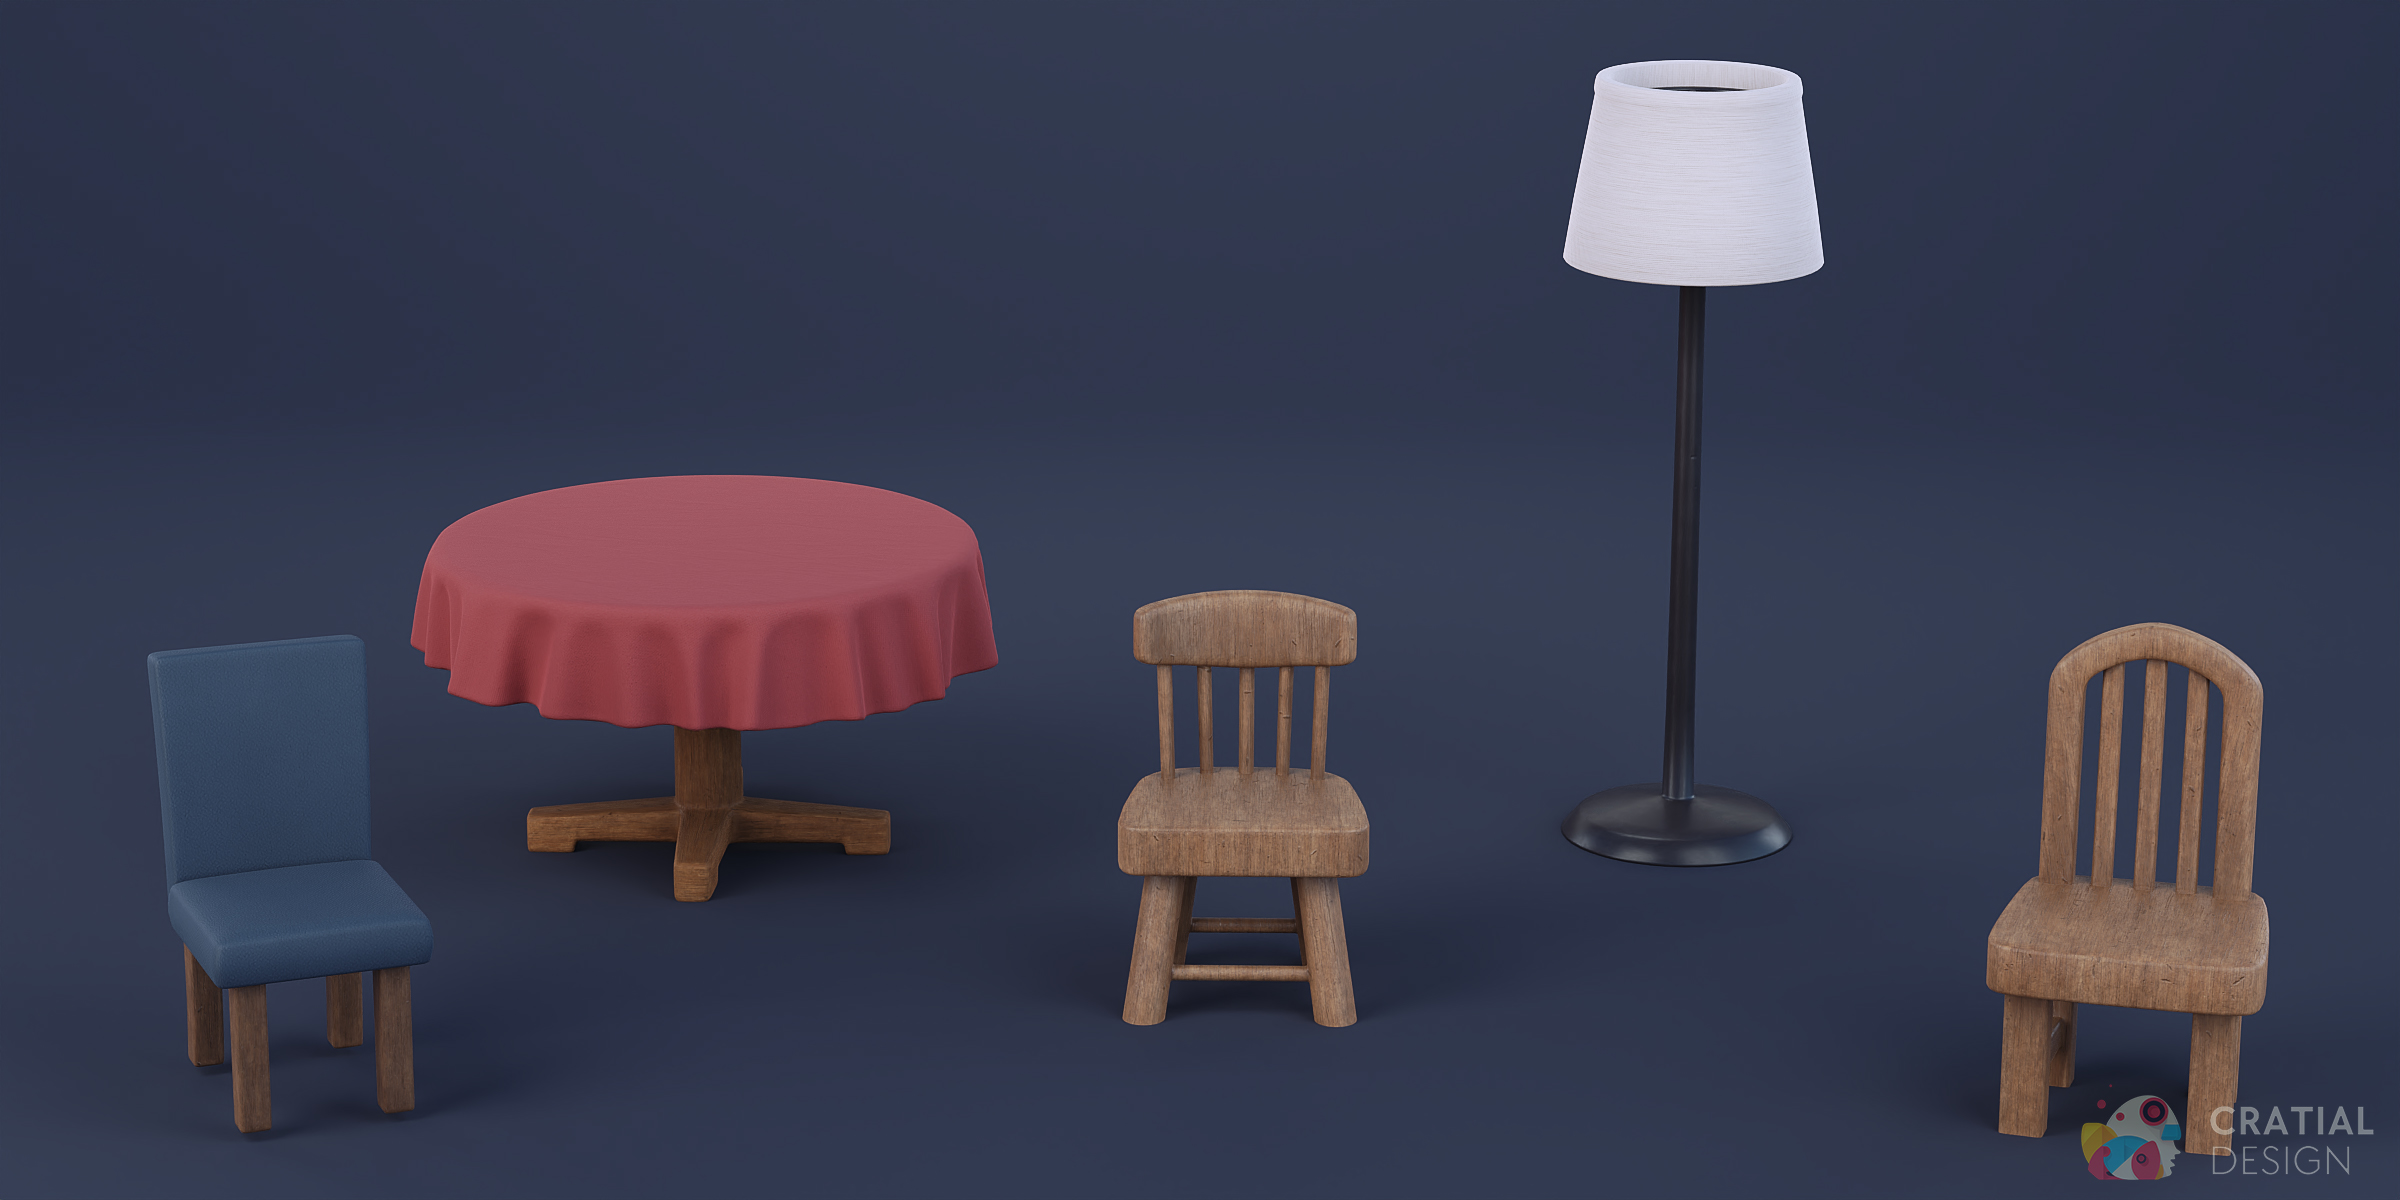 Cratial 3D - Stylized Chairs and Table 3D Models